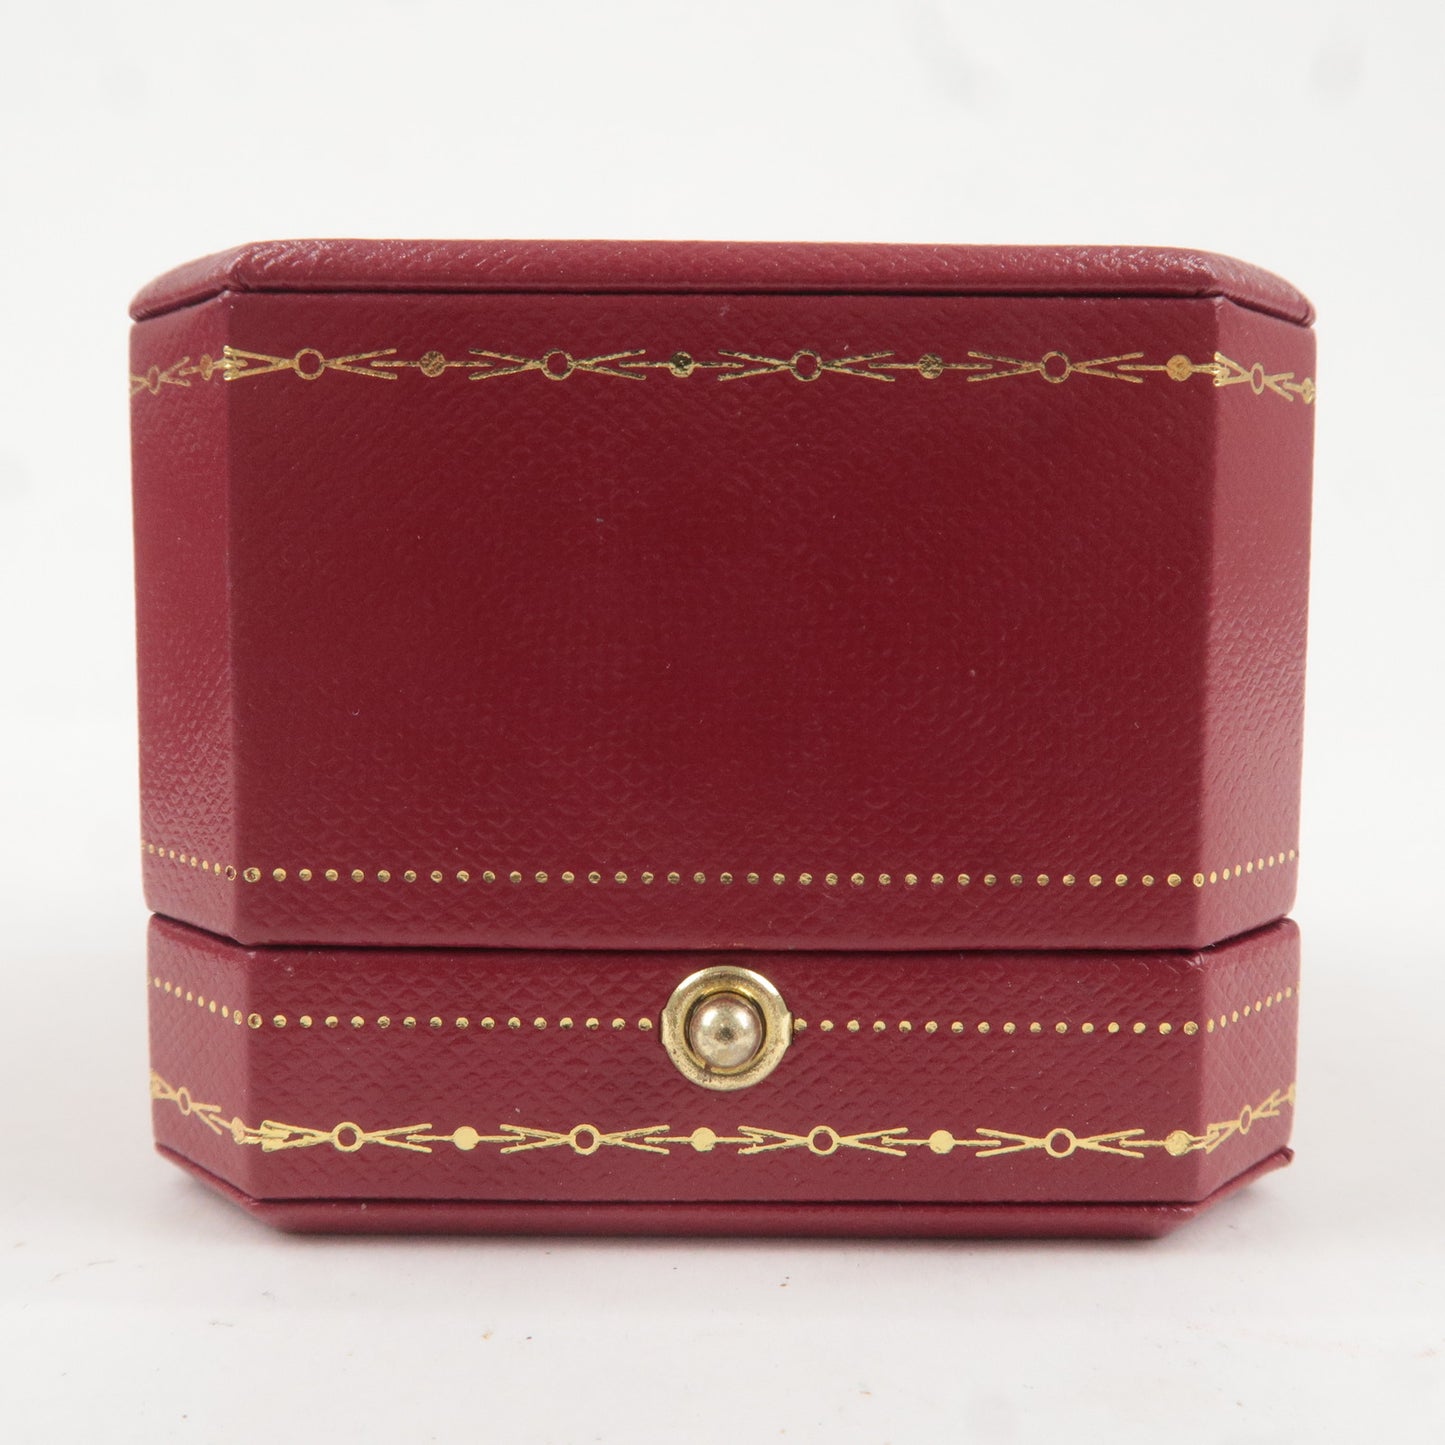 Cartier Set of 3 Ring Box Jewelry Box For Ring Red